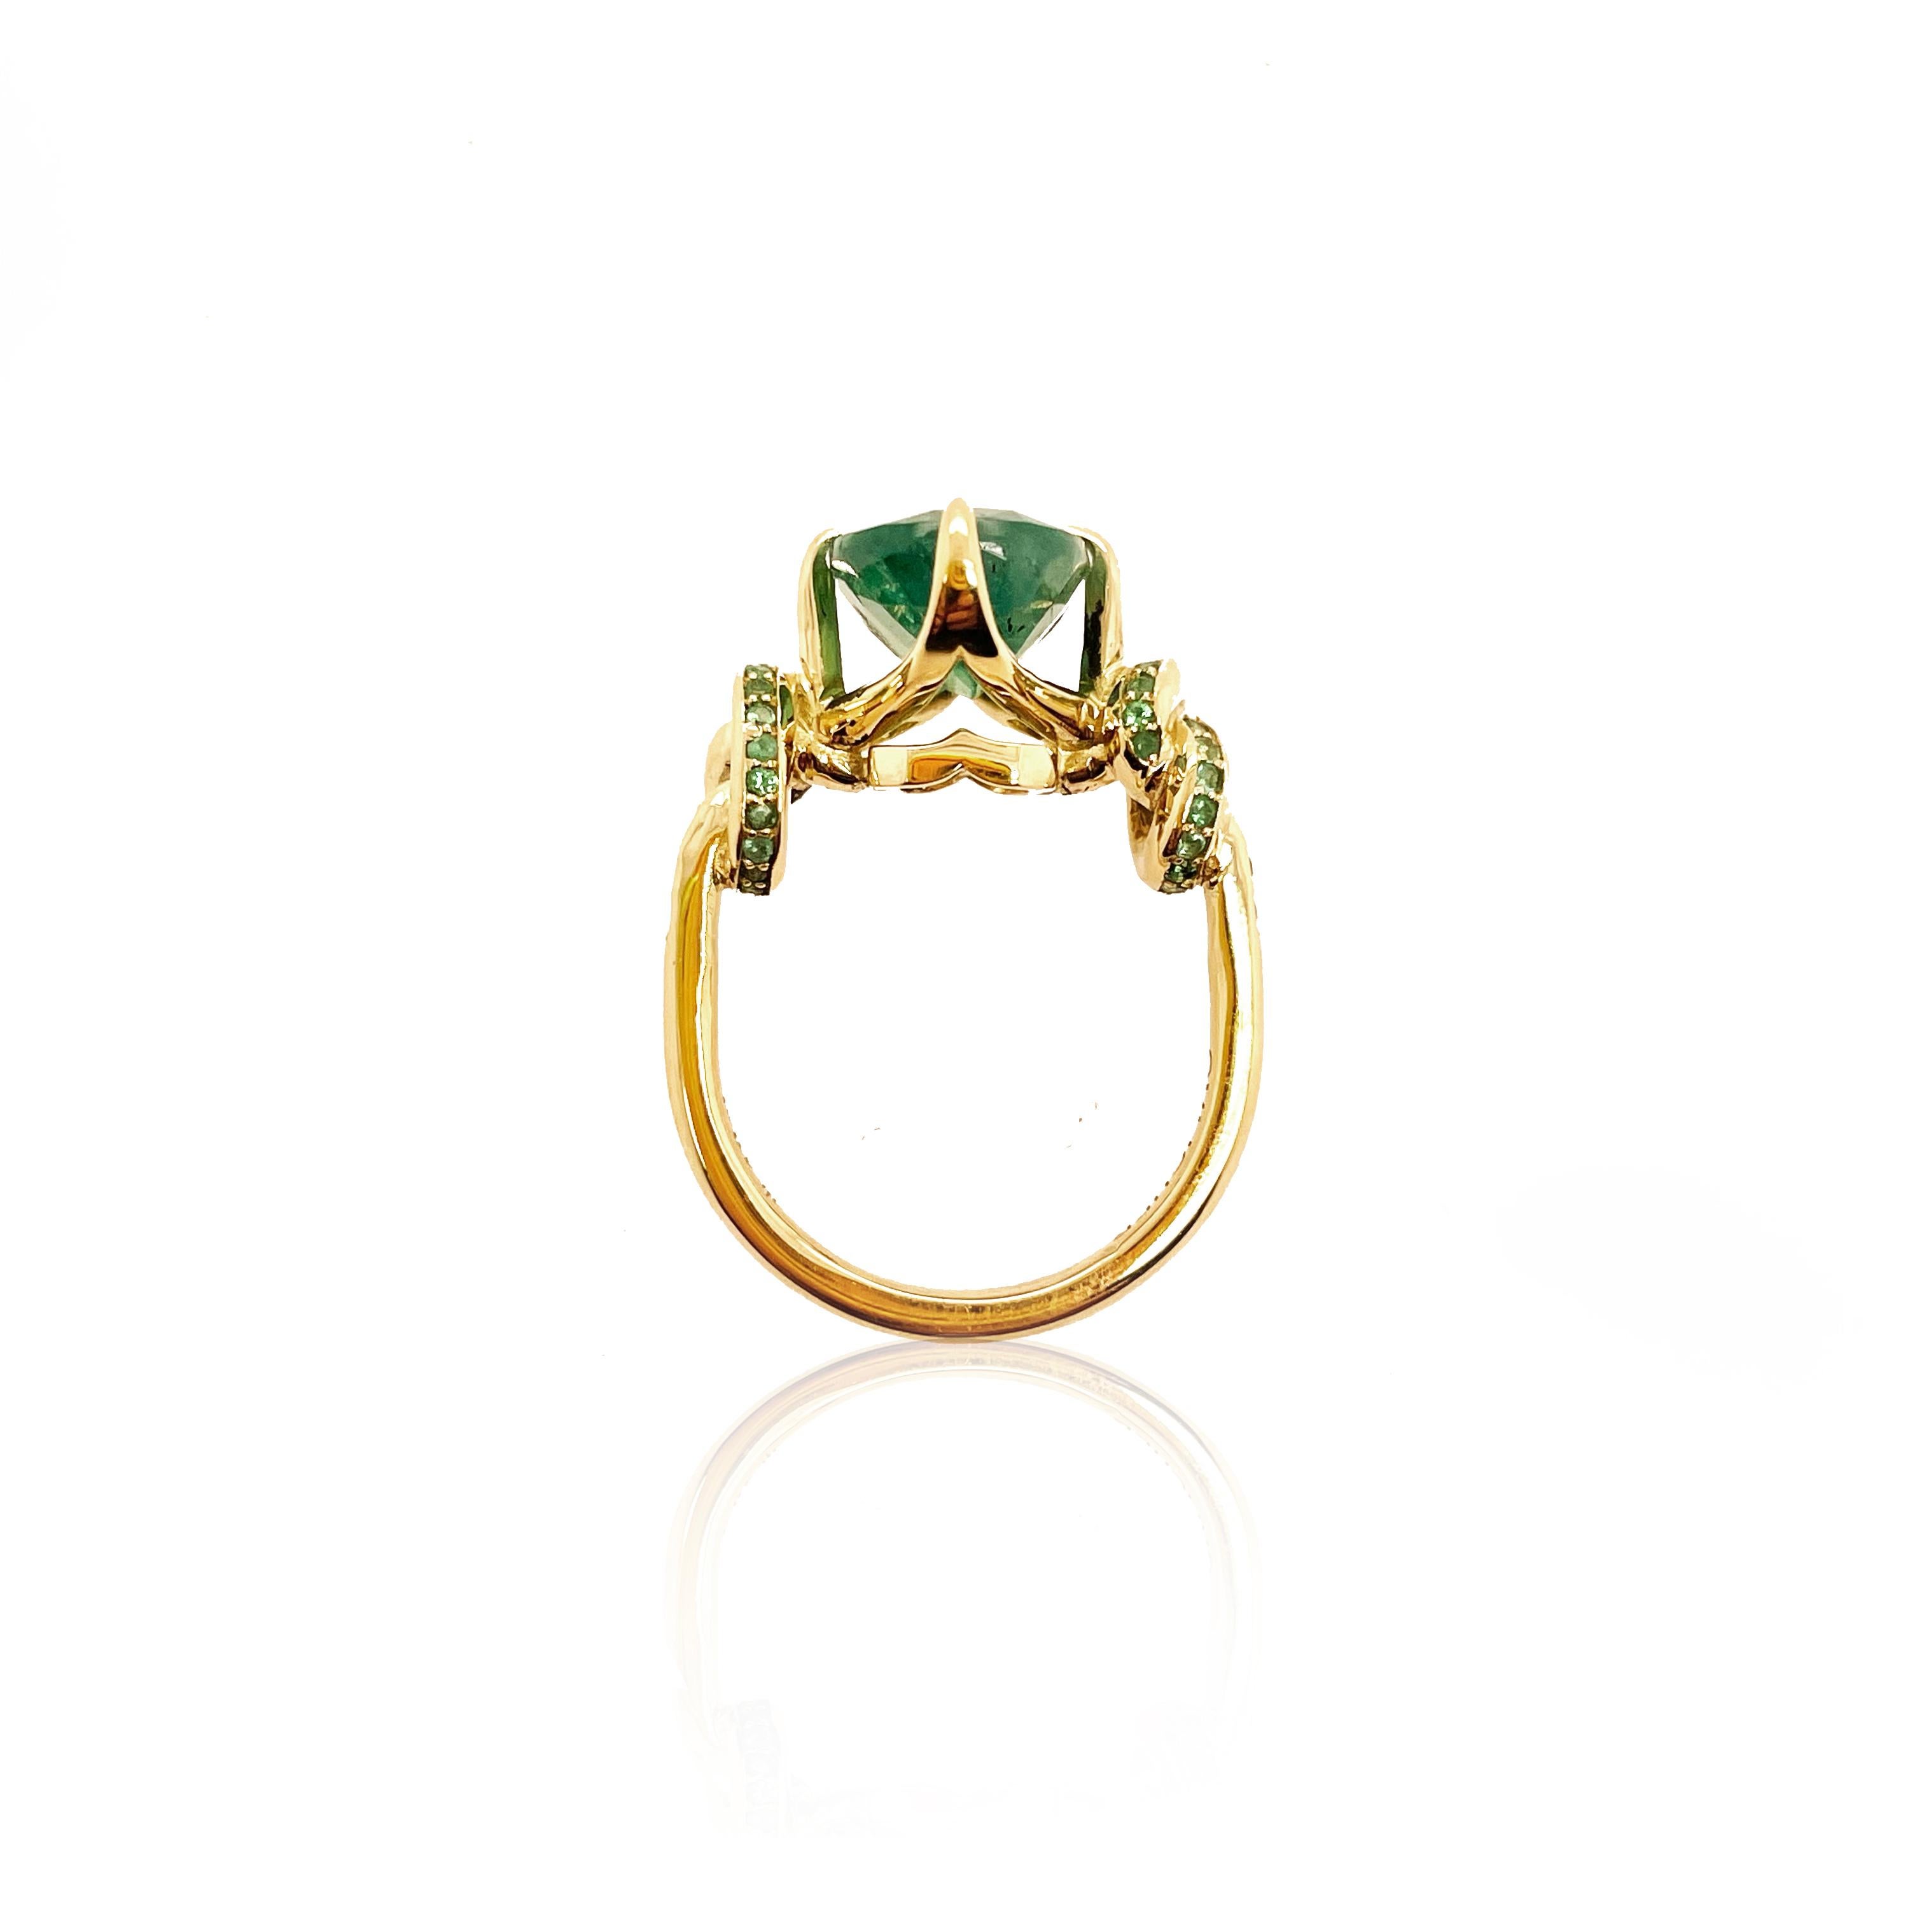 4.01ct Emerald Oval Cut Forget Me Knot Ring in 18Carat Yellow Gold with Emeralds For Sale 4